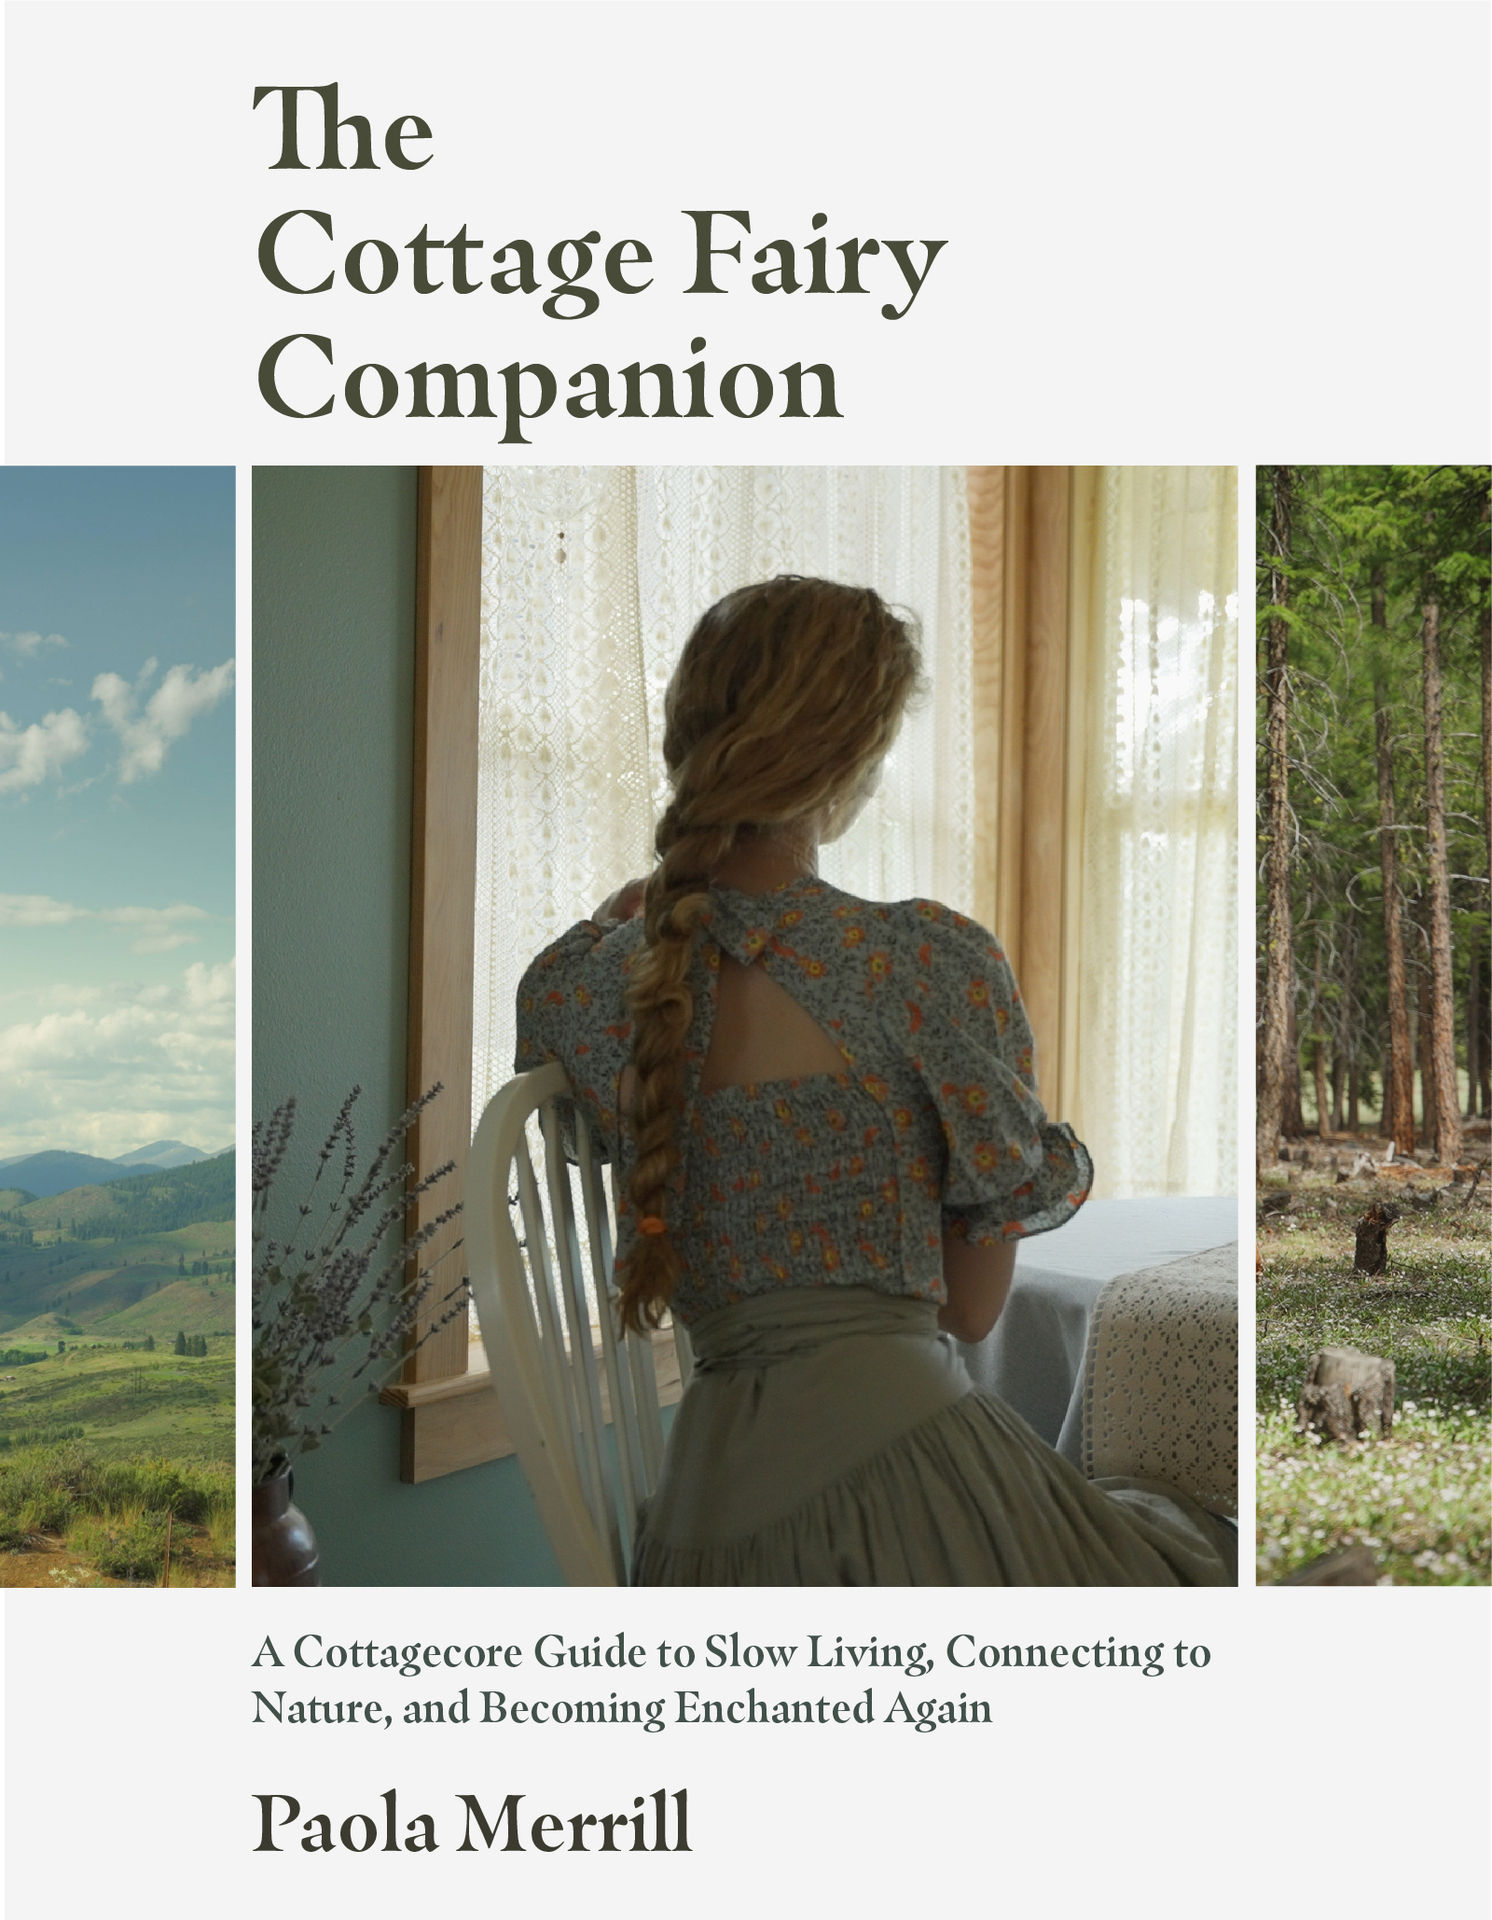 the cottage faity book